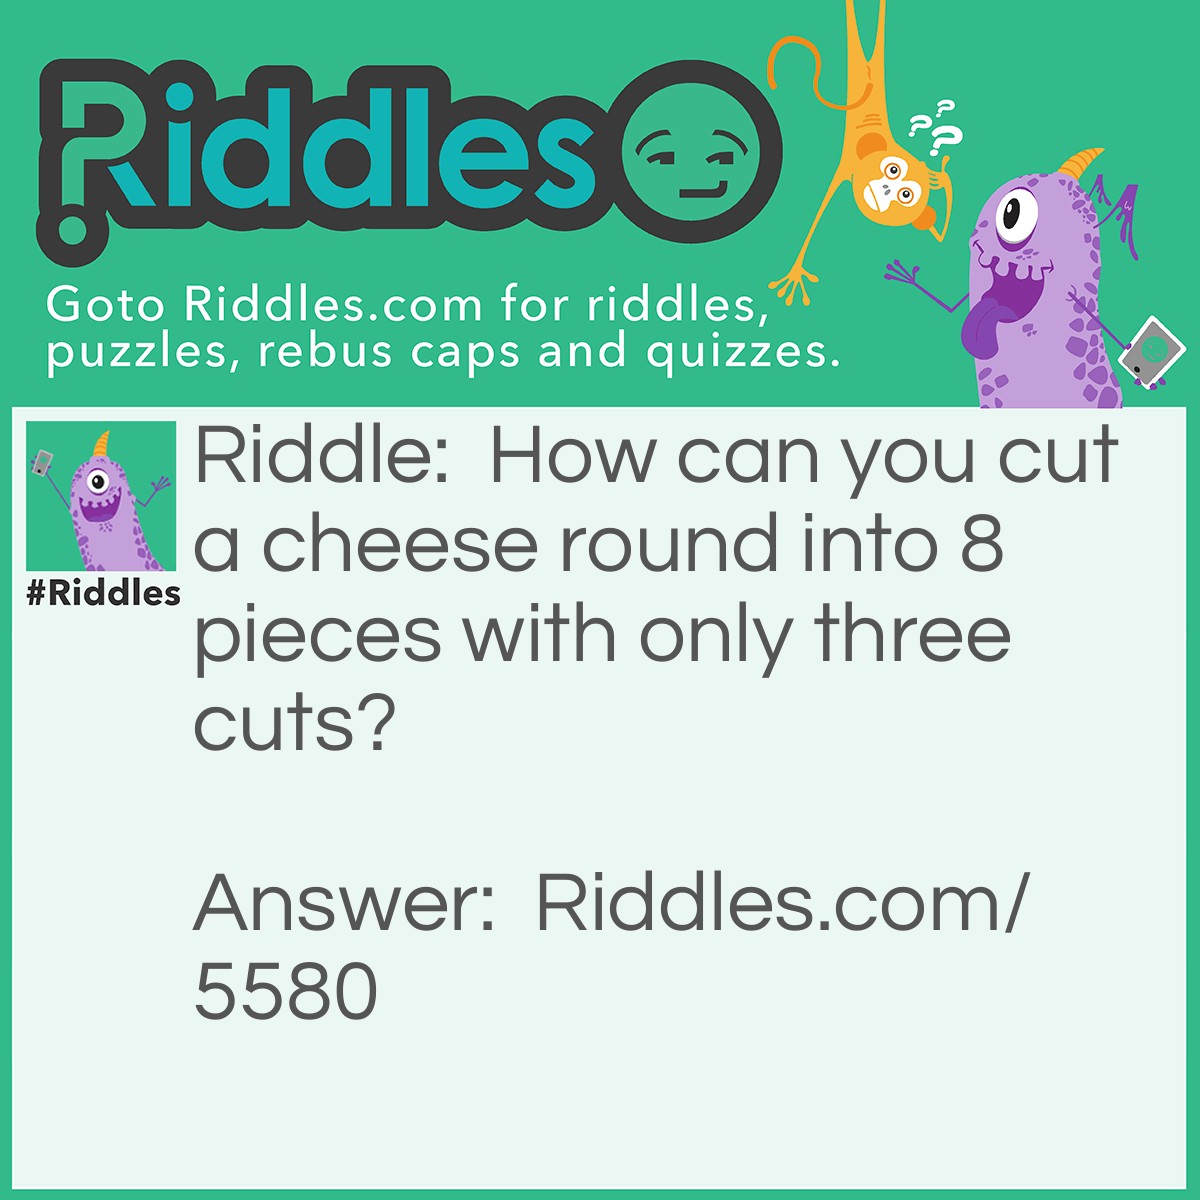 Riddle: How can you cut a cheese round into 8 pieces with only three cuts? Answer: See image below for three cuts needed to divide a cheese round into eight pieces.
<img src="../../uploads/images/cylinder-riddle.png" alt="Cylinder cut into eight pieces with three lines" />